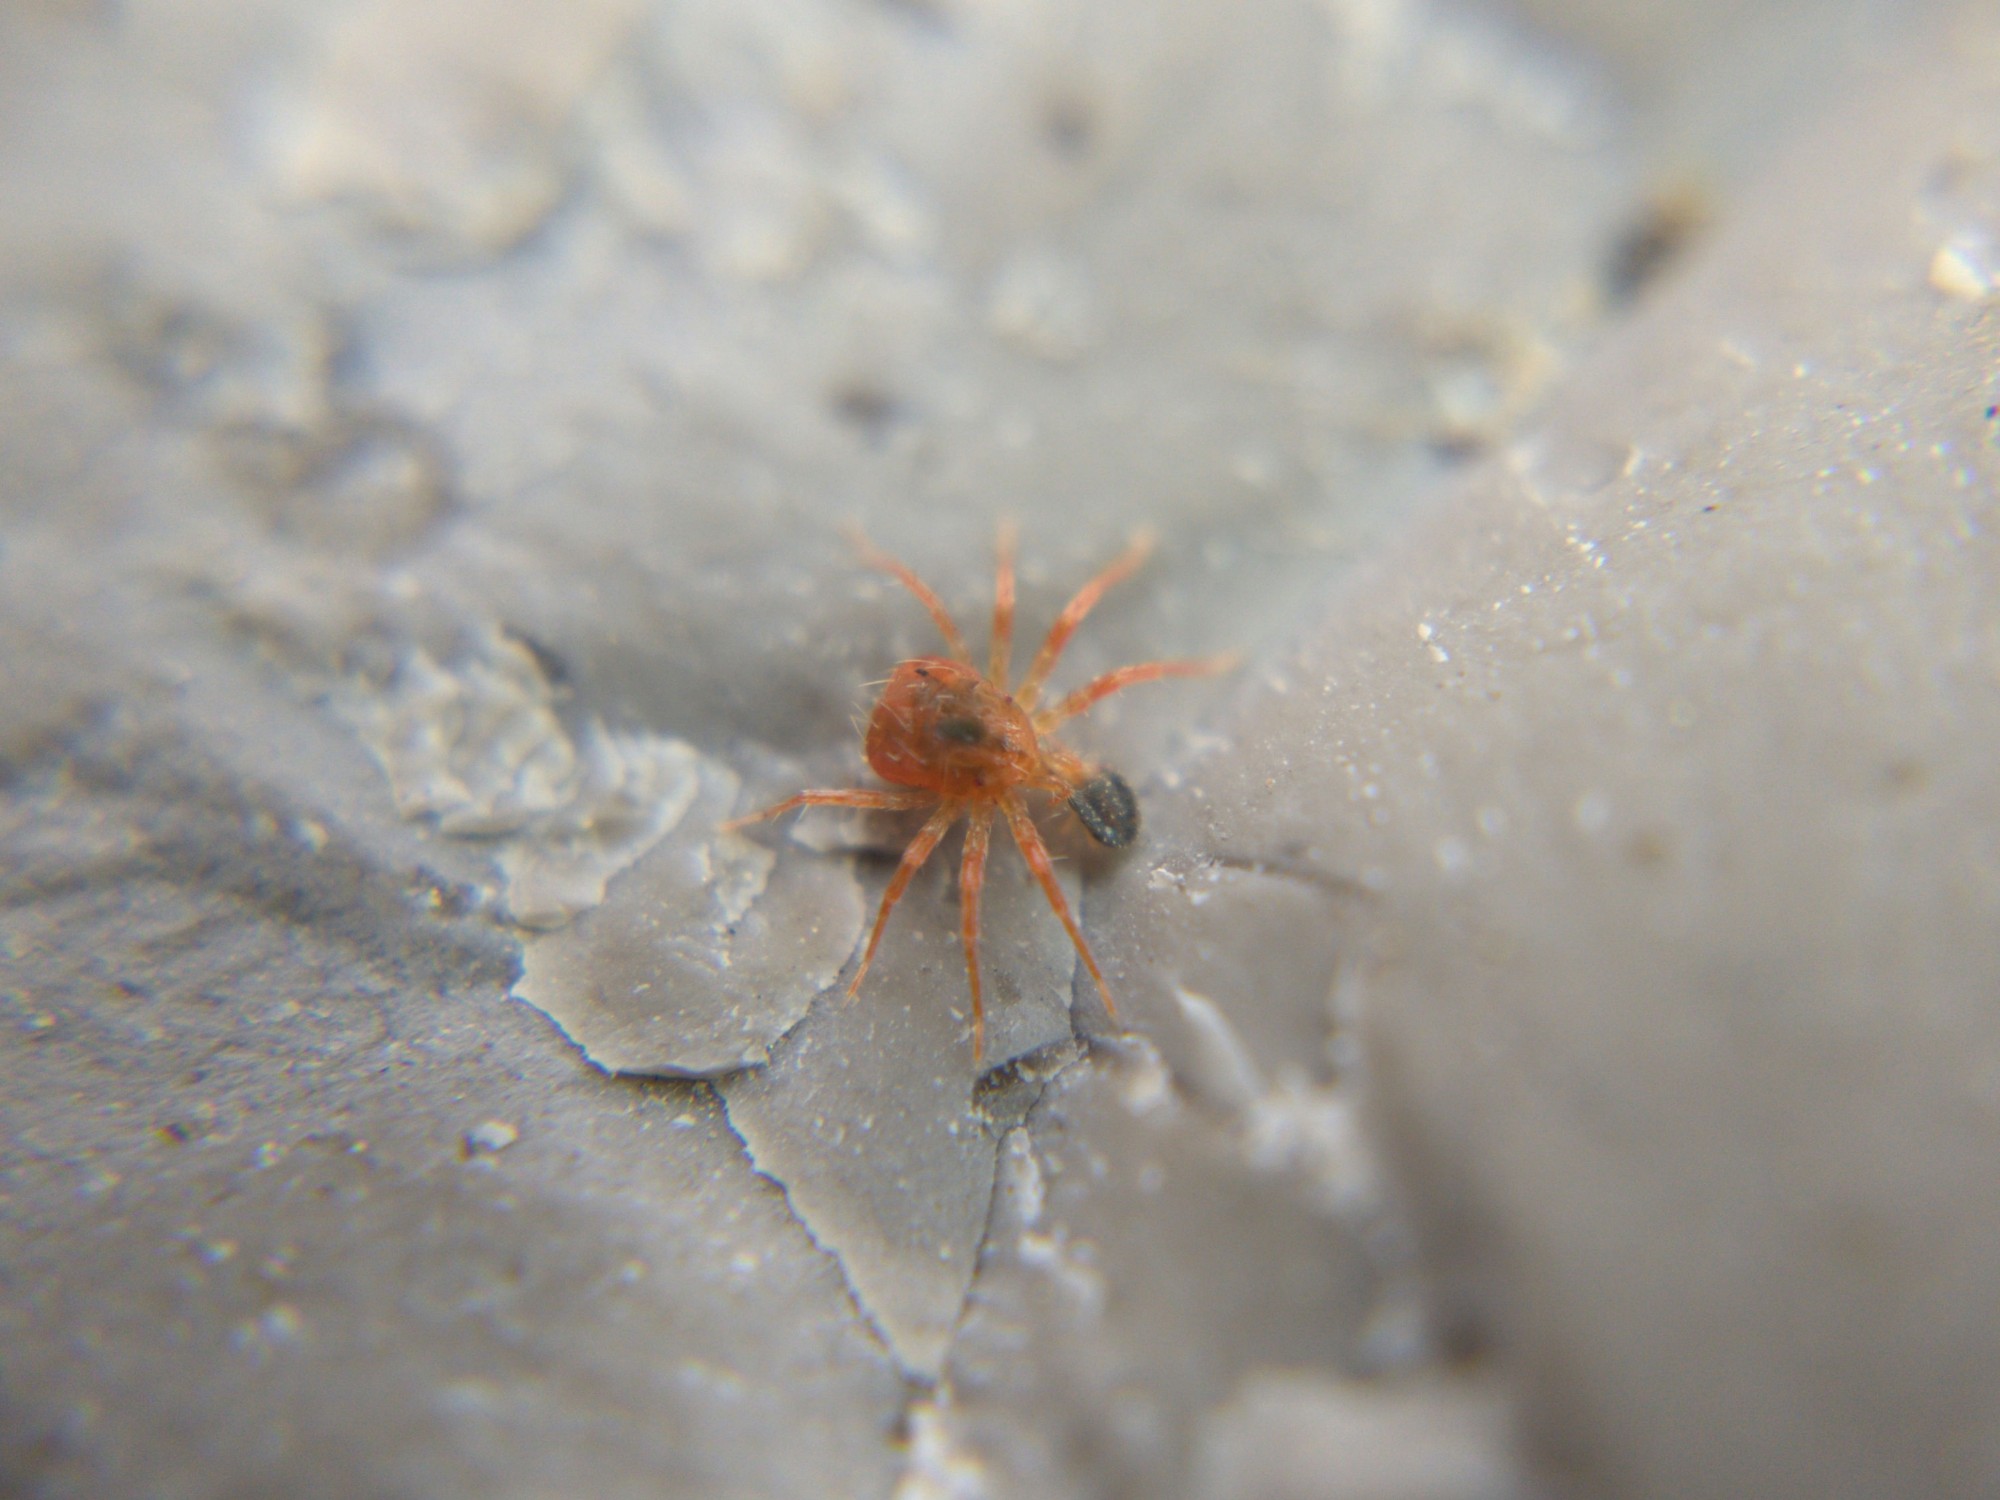 A larger, light red, hairy anystid mite preying on a tiny blueish clover mite